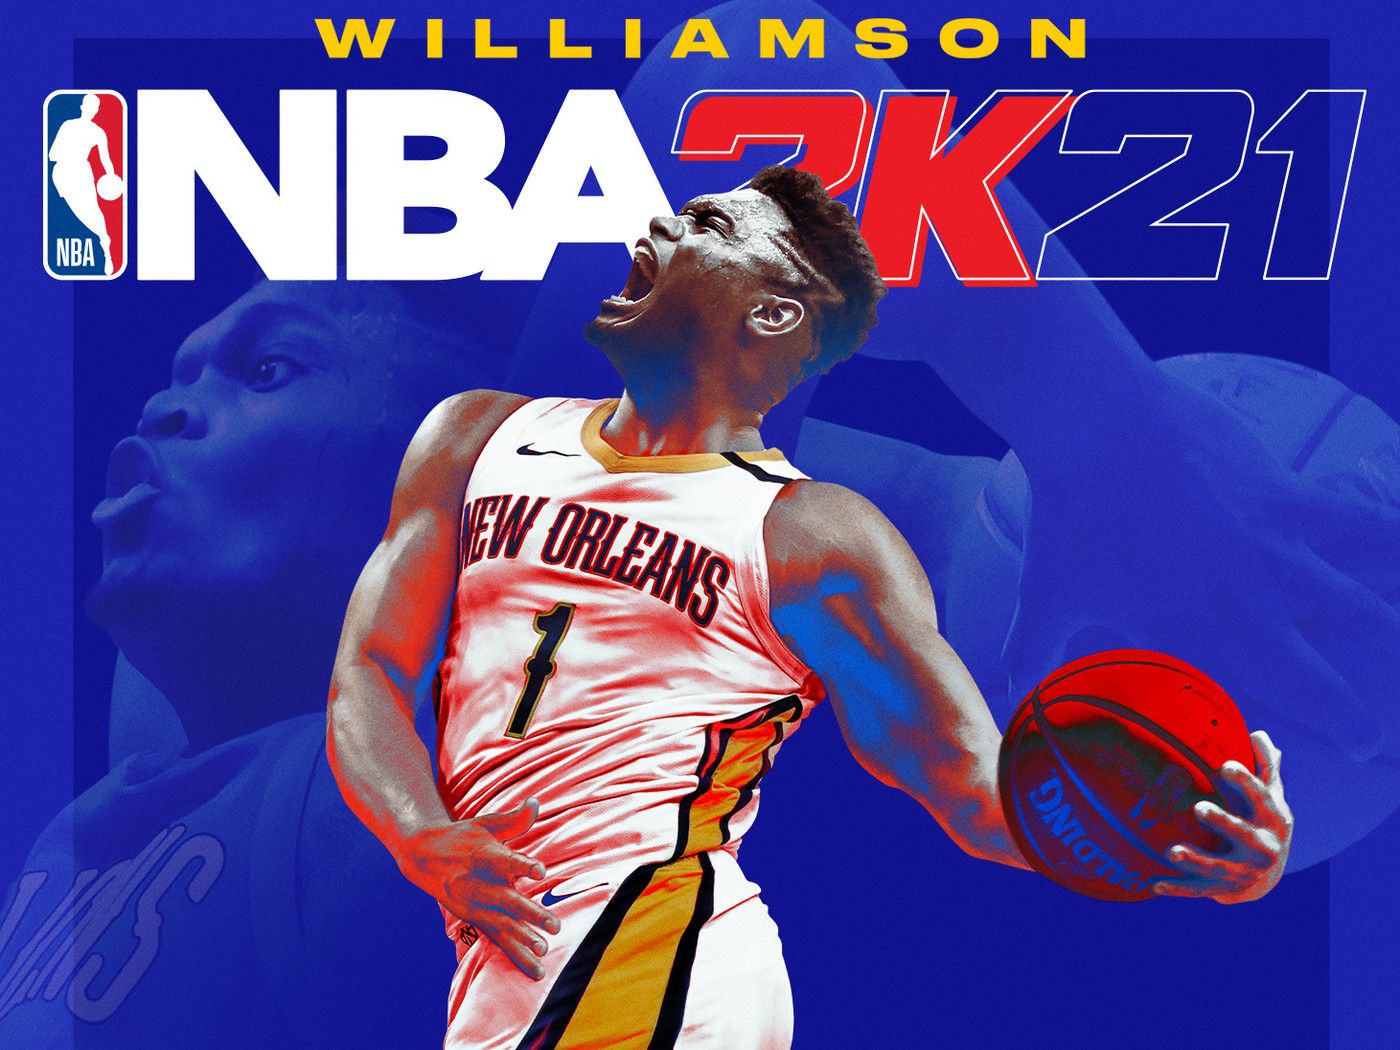 NBA 2K21's PS5 and Series X versions will cost $69.99